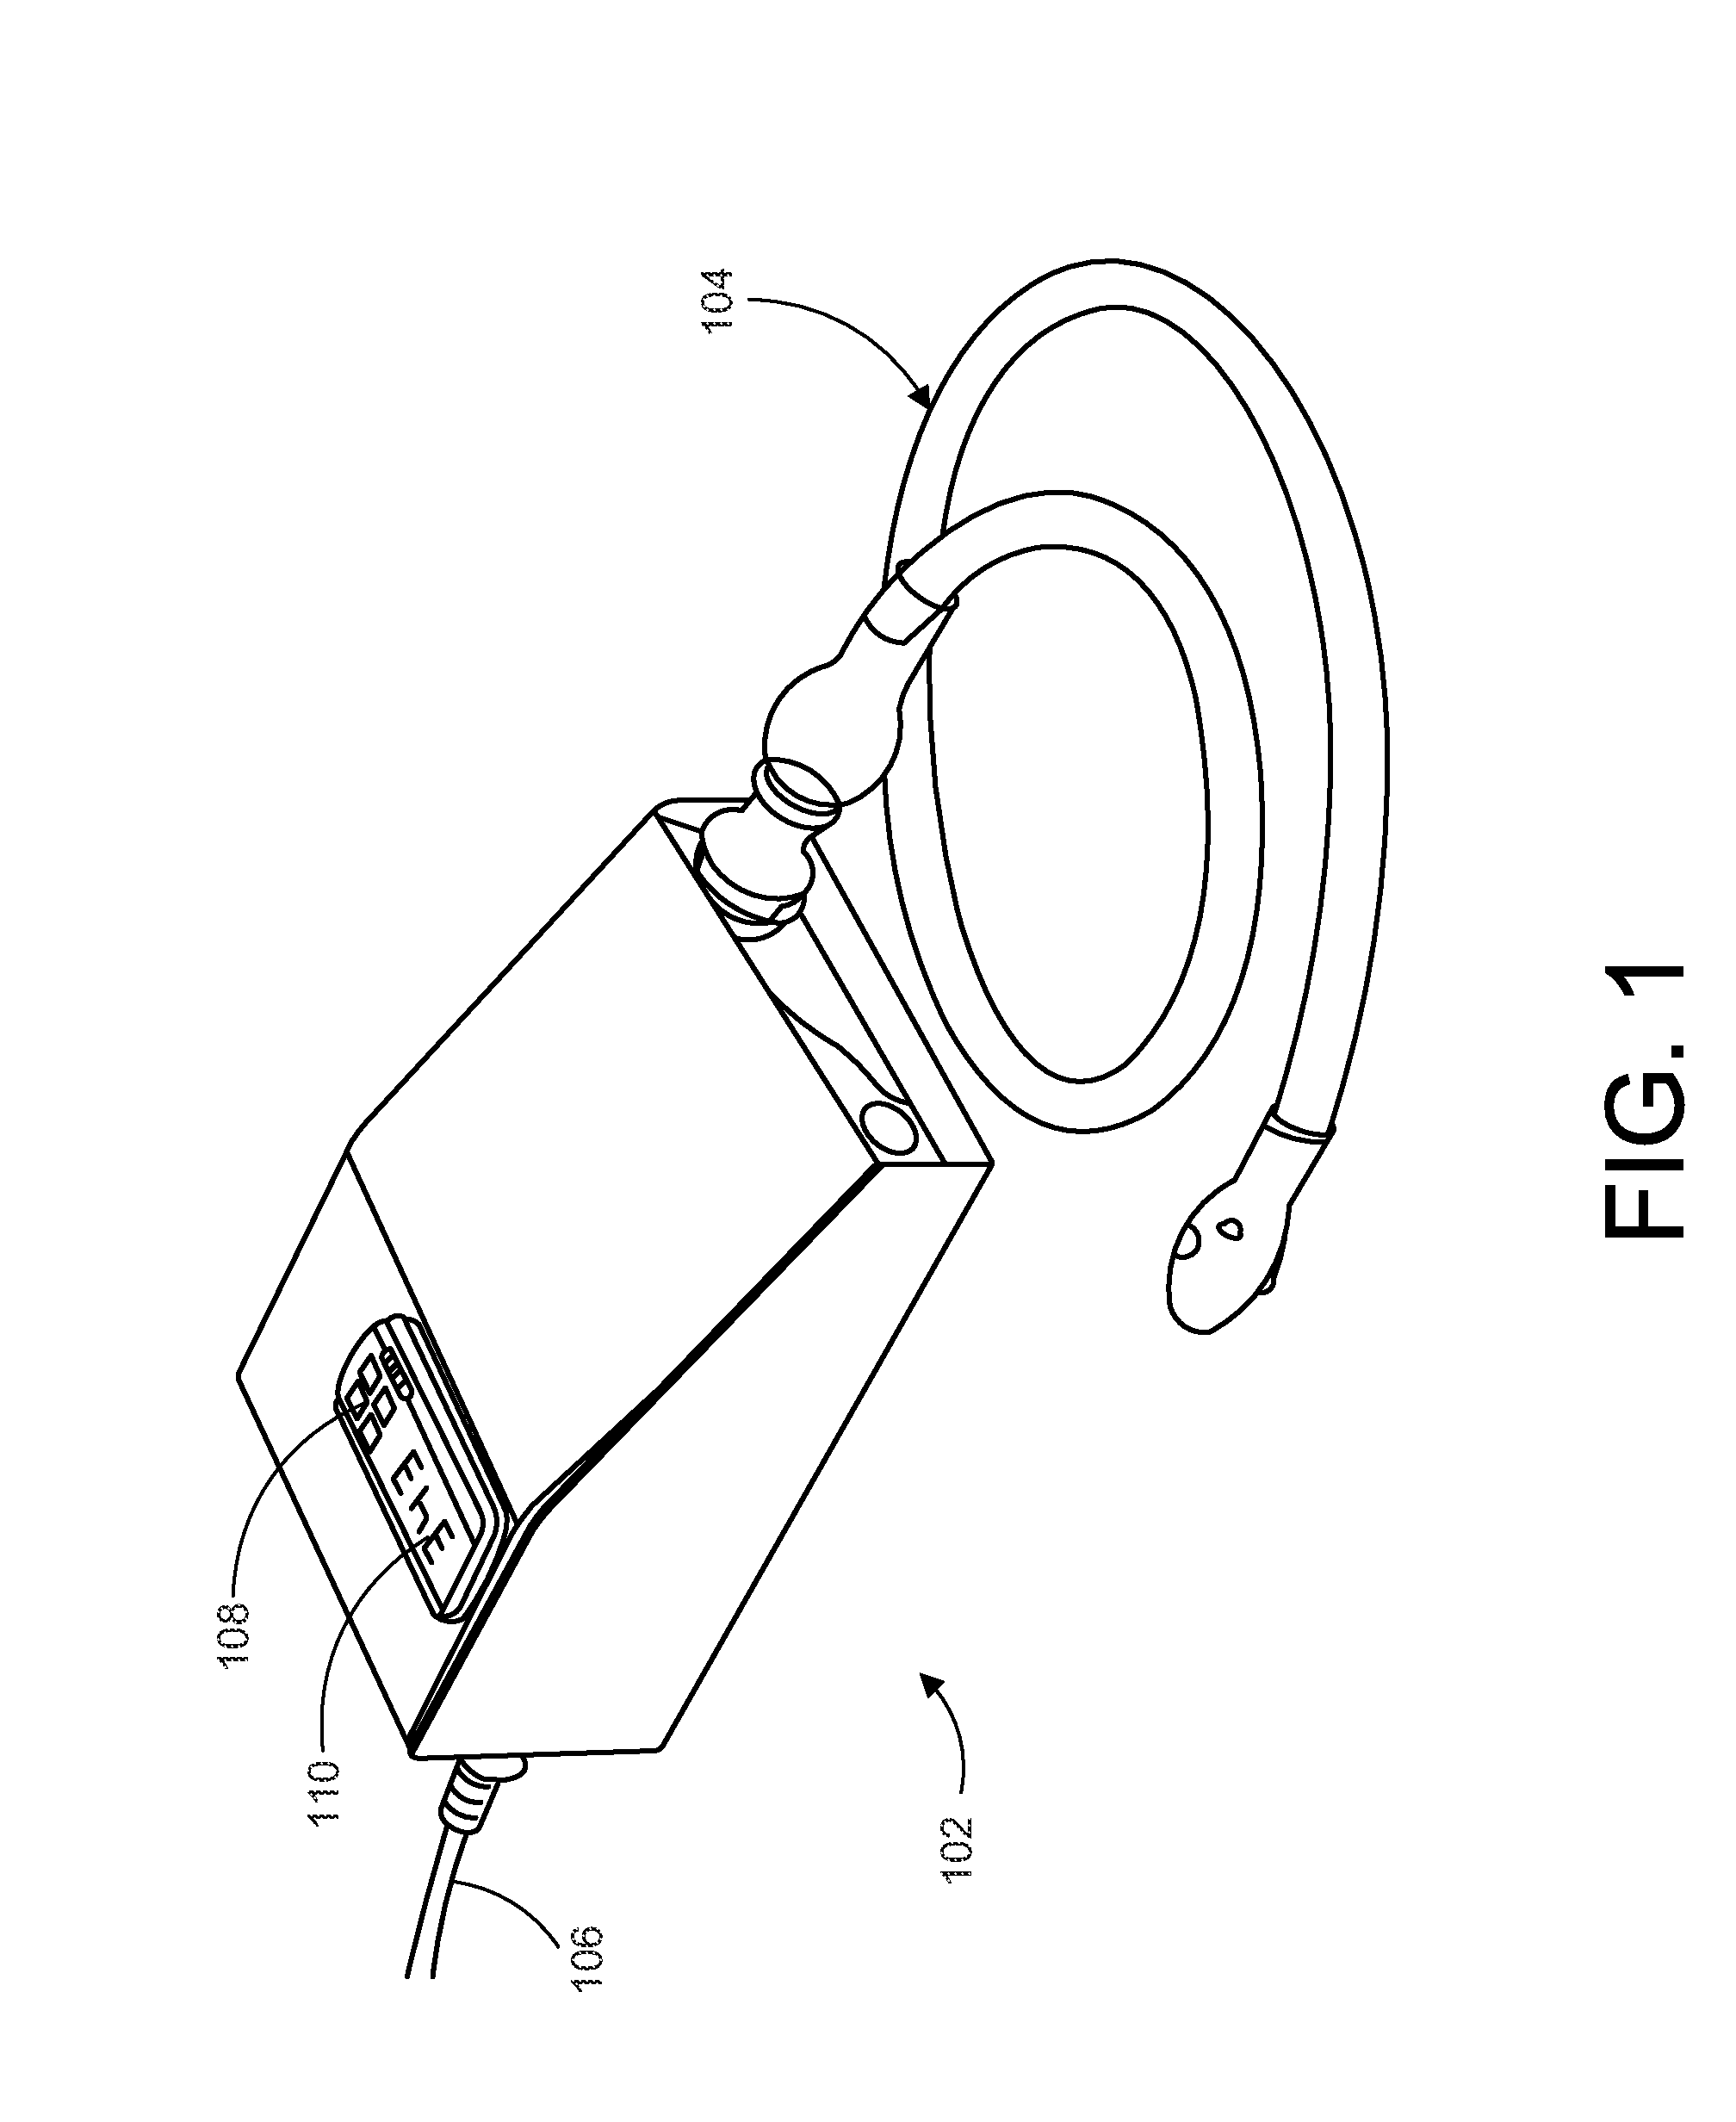 Vaporizer heating assembly and method of regulating a temperature within the vaporizer heating assembly